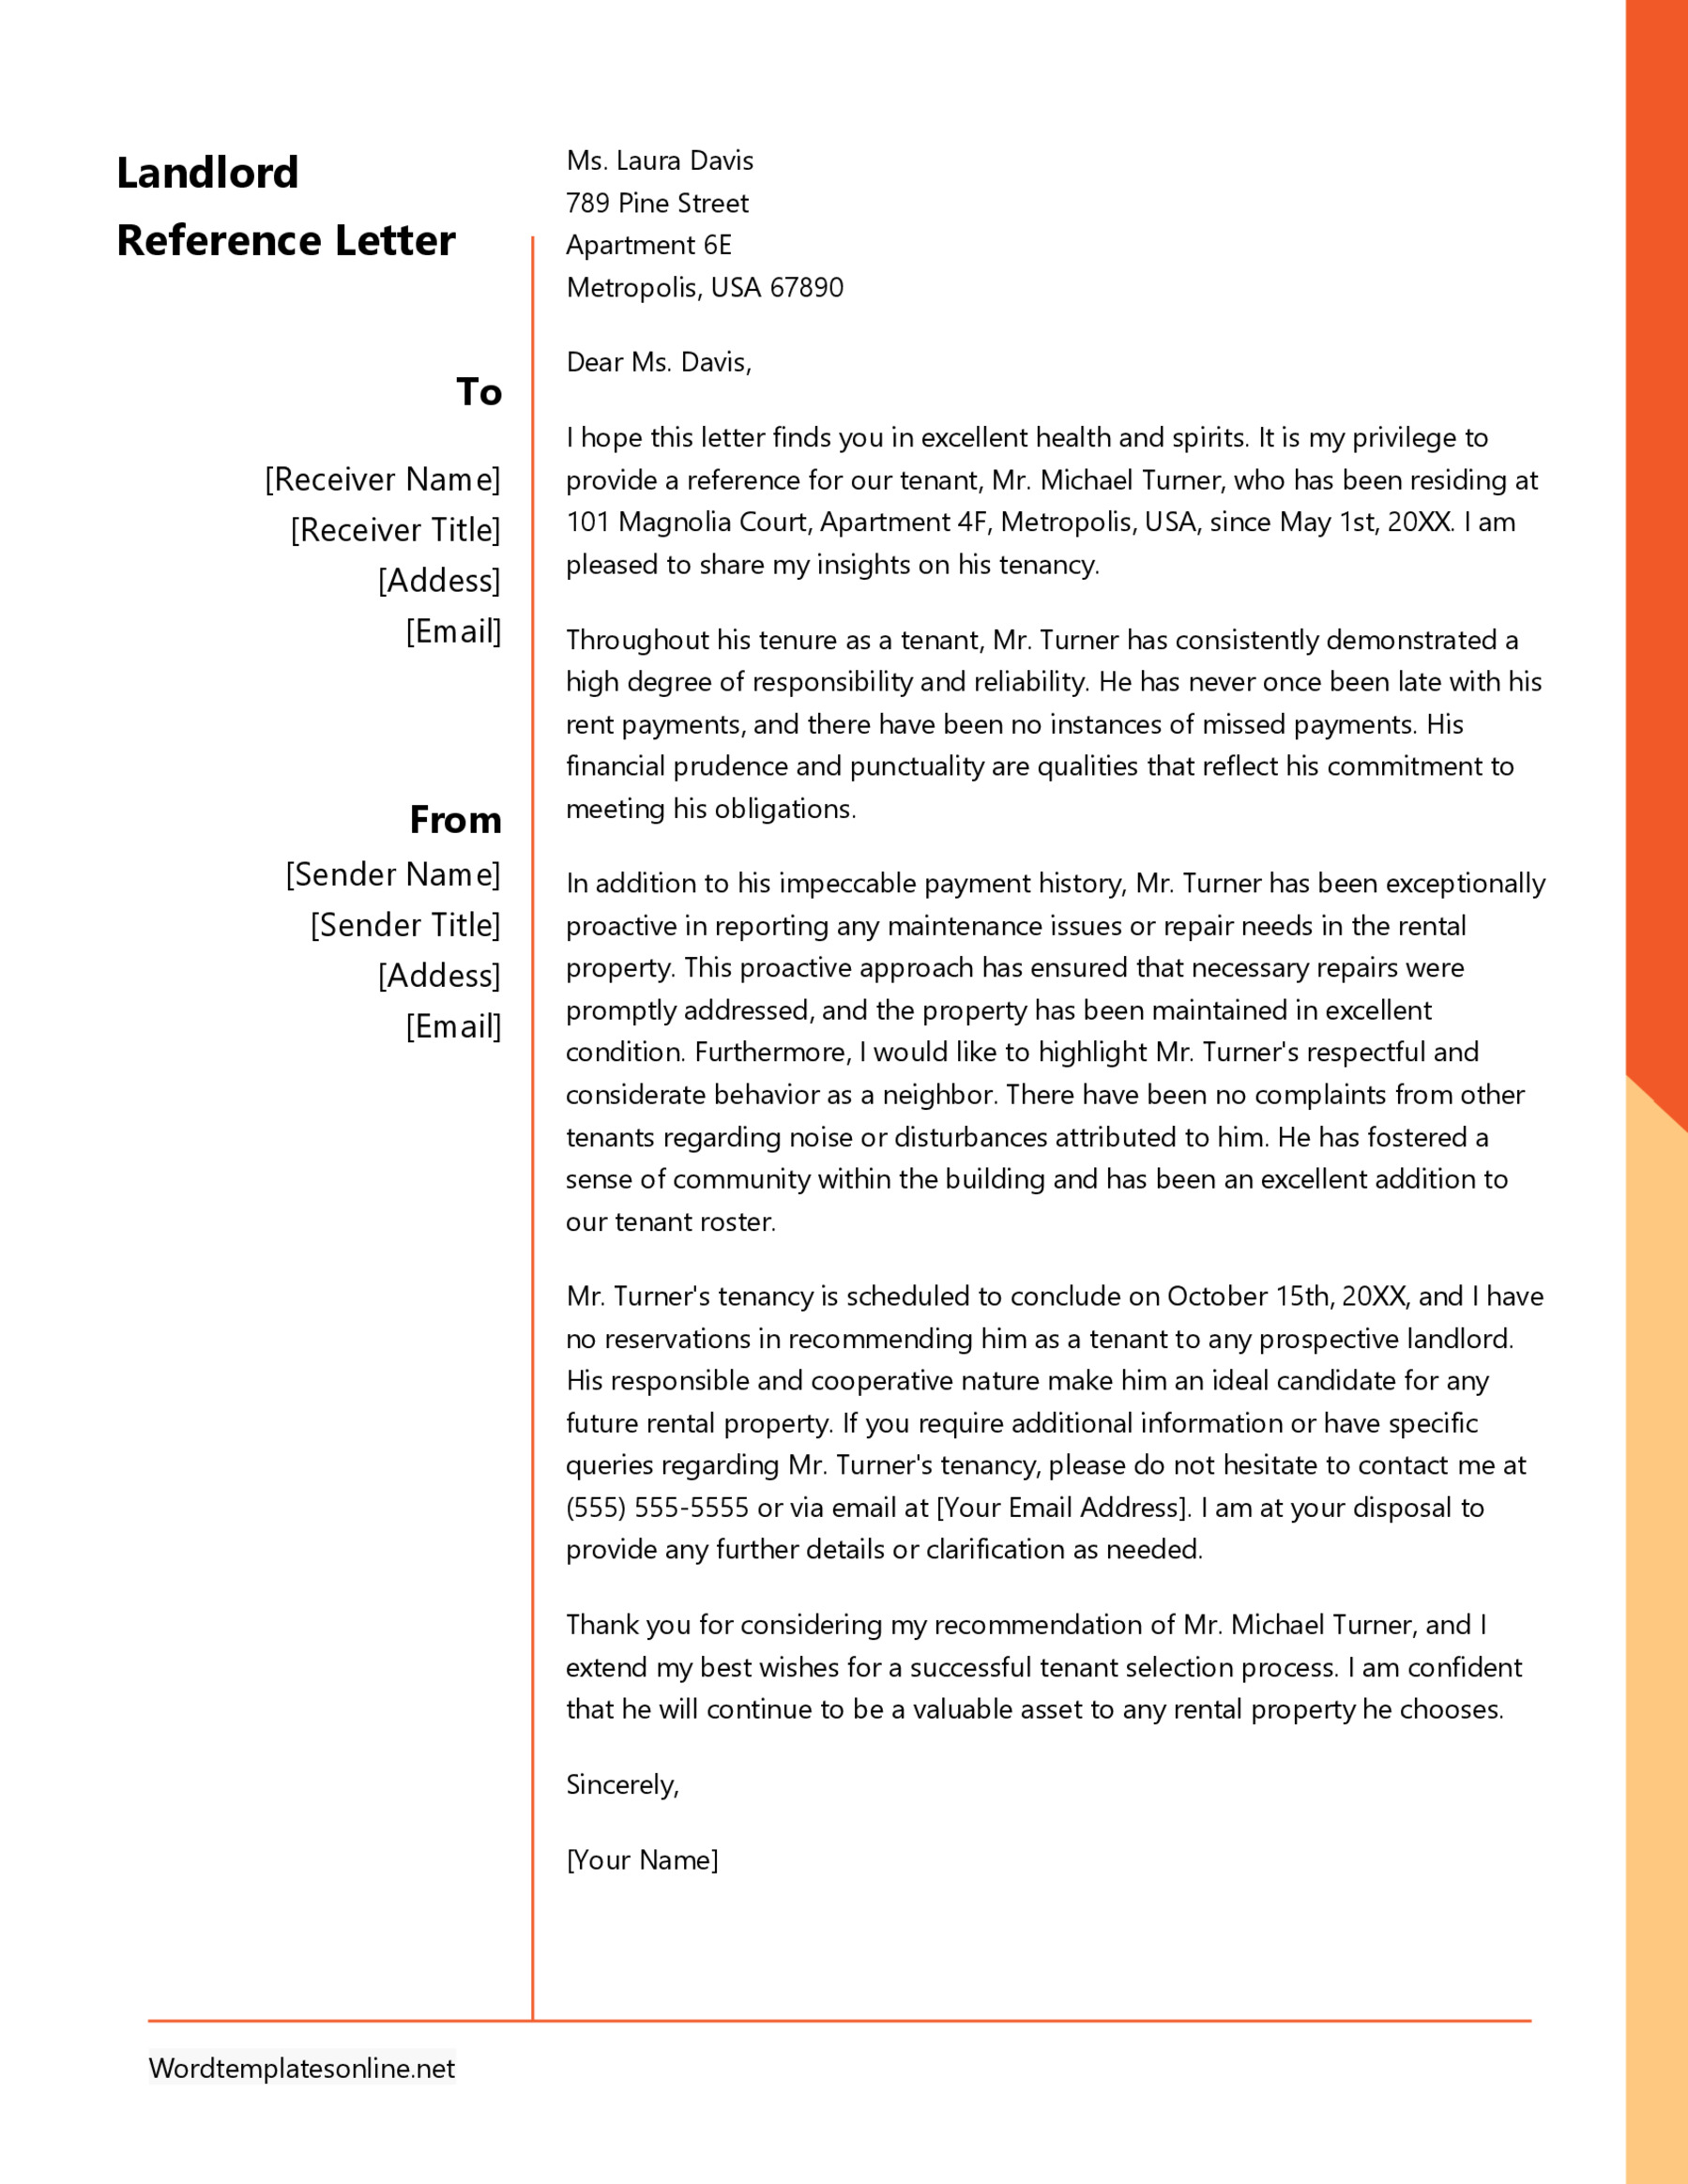 Landlord Reference Letter Template for Free